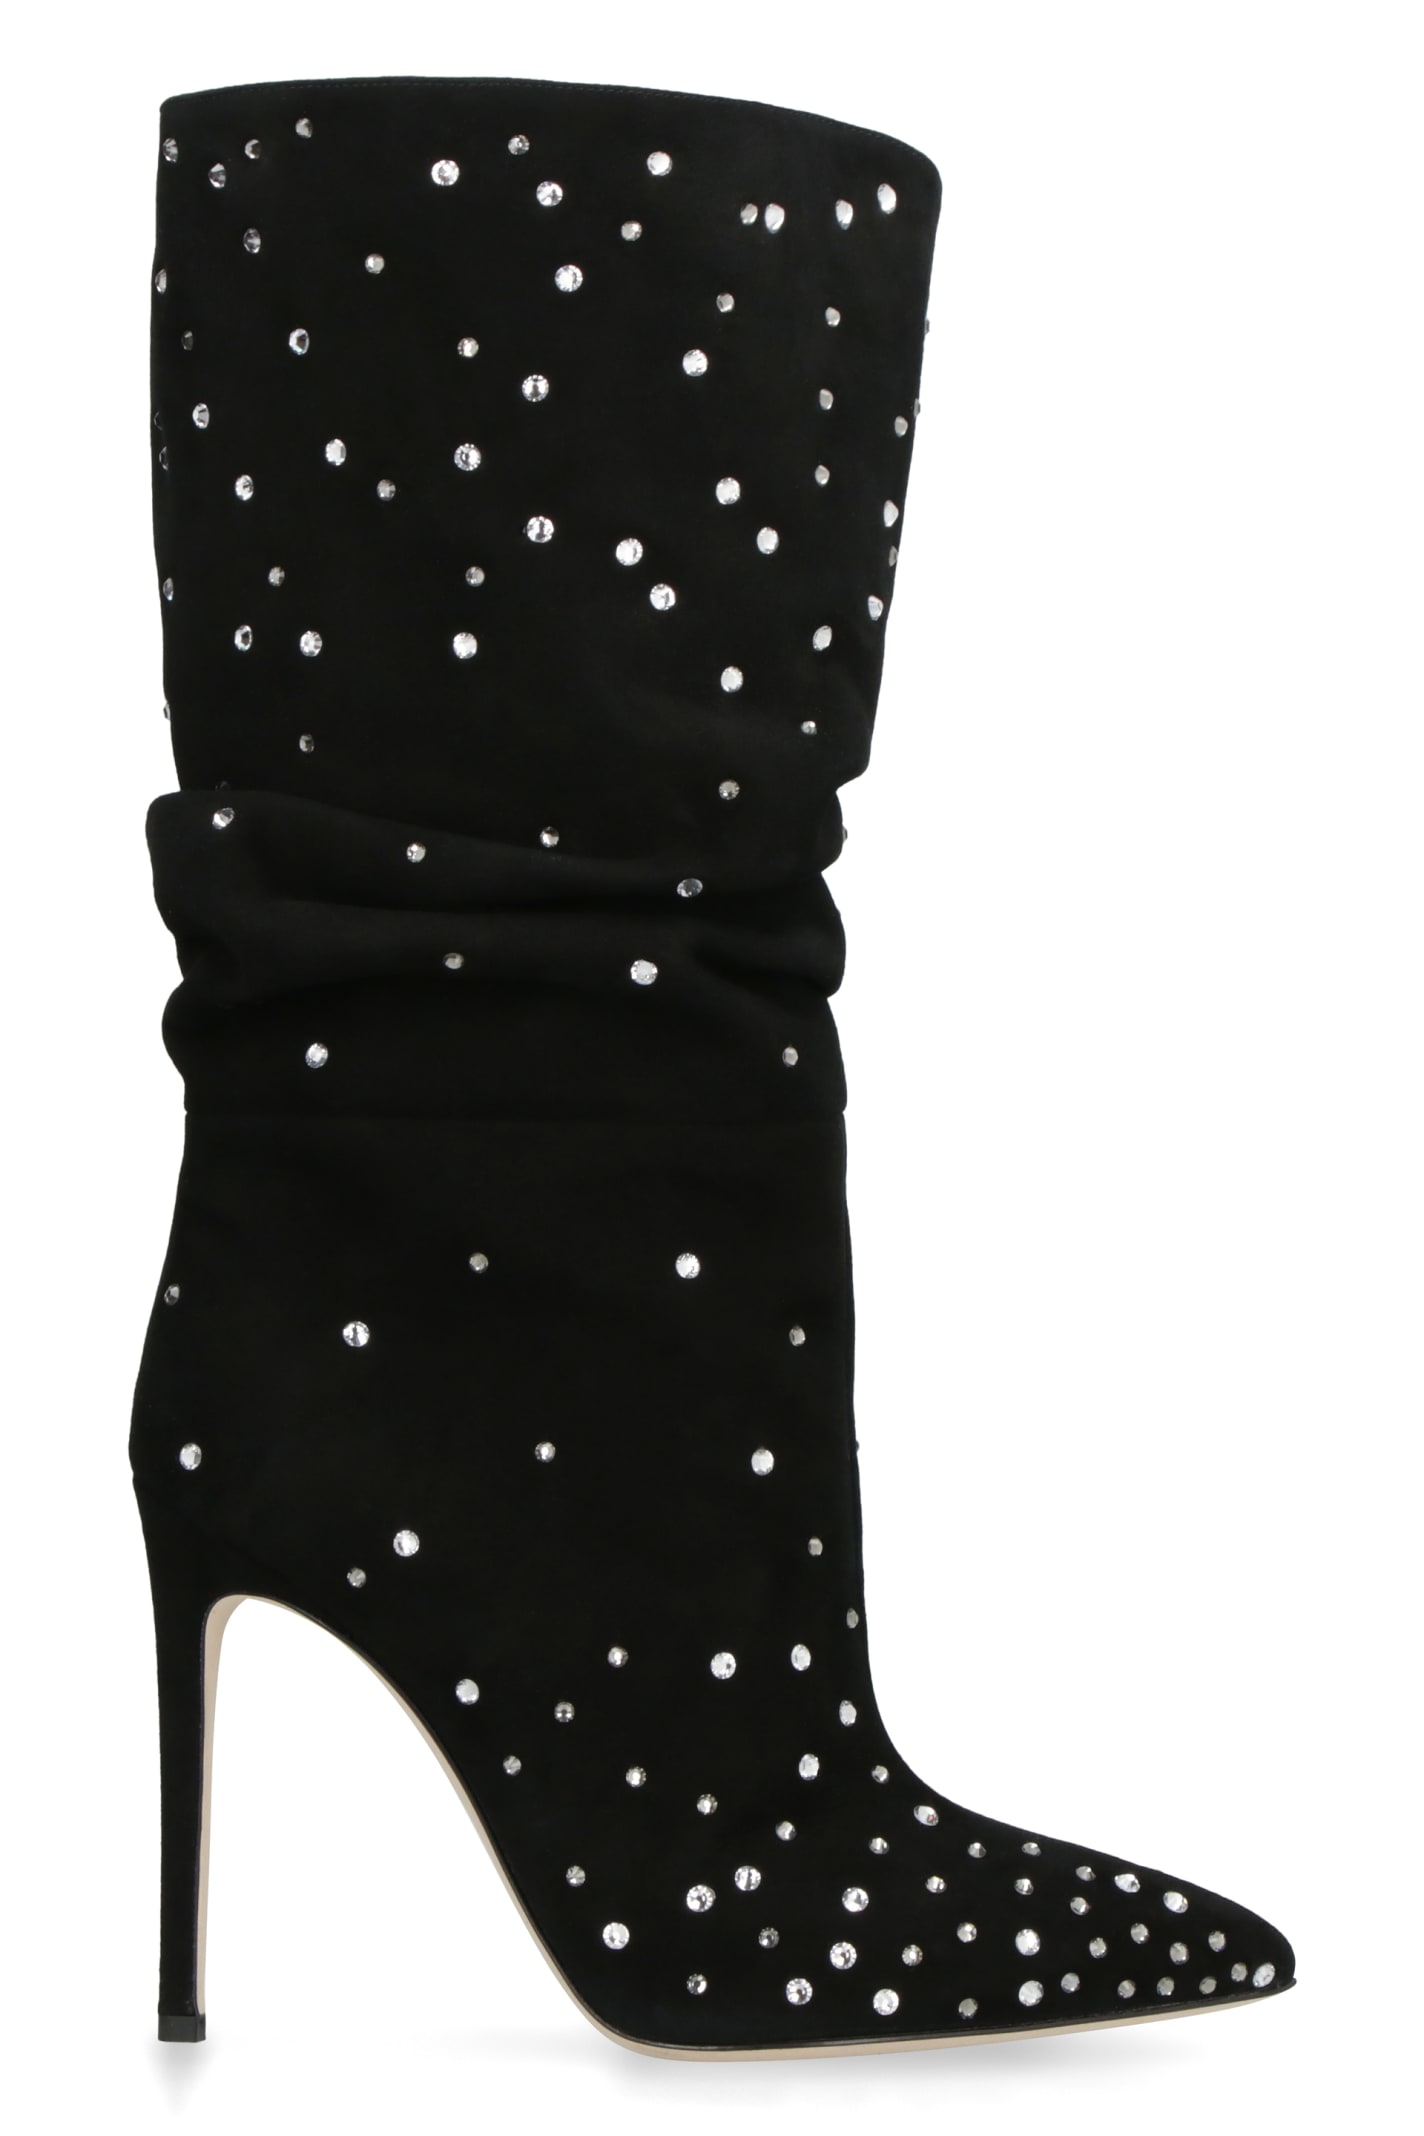 Paris Texas Holly Suede Knee High Boots